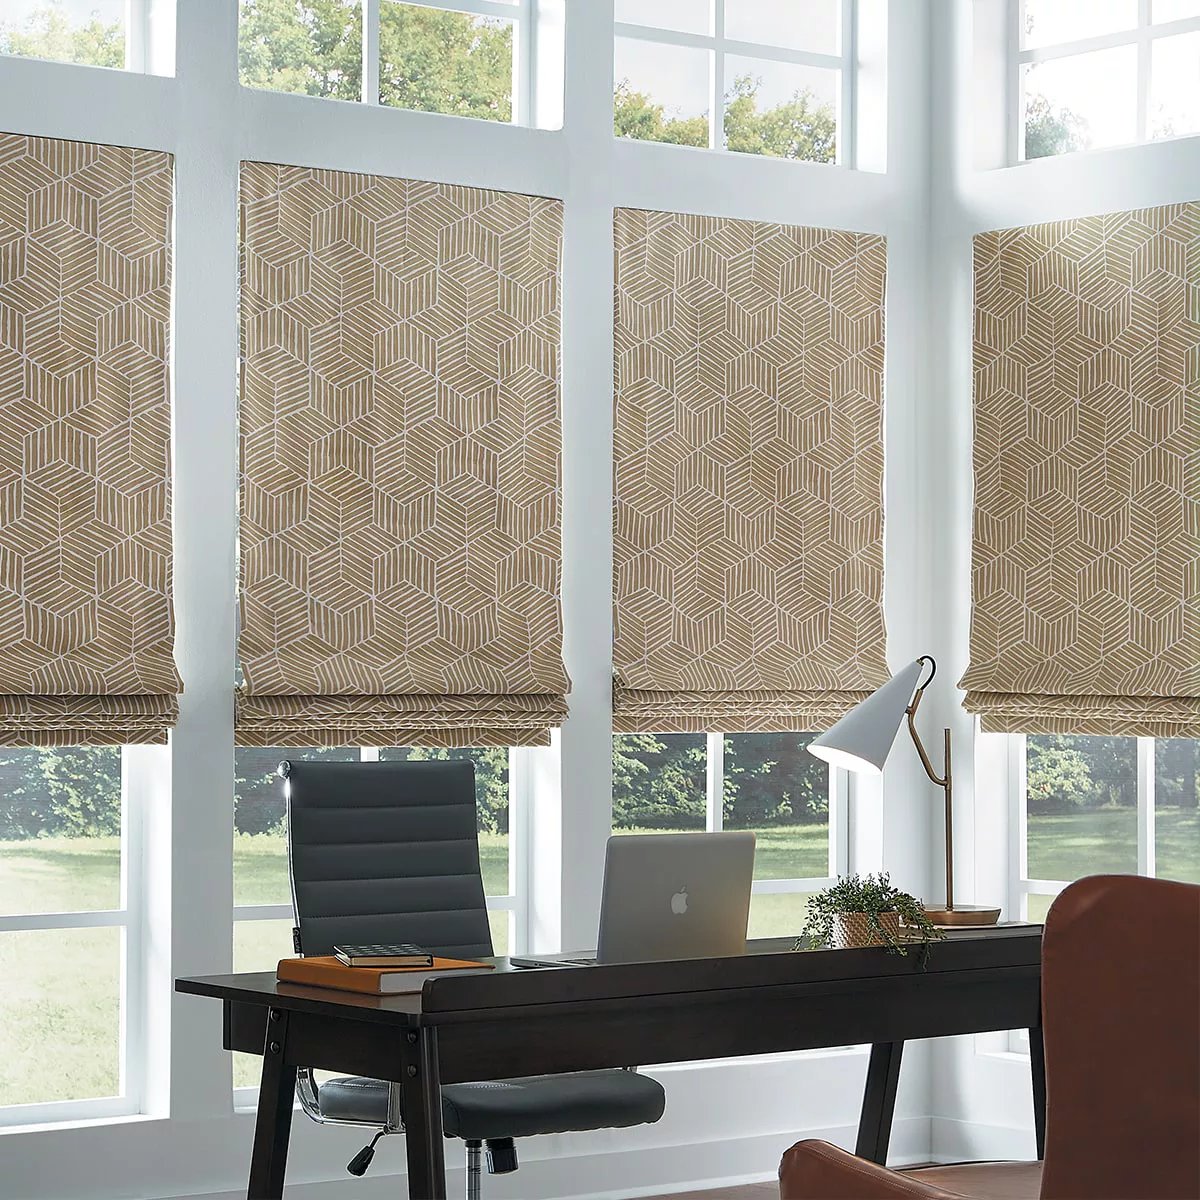 Elevate your windows with the luxurious folds of #RomanShades! Soft, elegant, and functional, these shades from #BlindsBros add a sophisticated flair to any room.

Choose from a variety of fabrics and patterns. 

Details at blindsbros.com! 🏛️💡